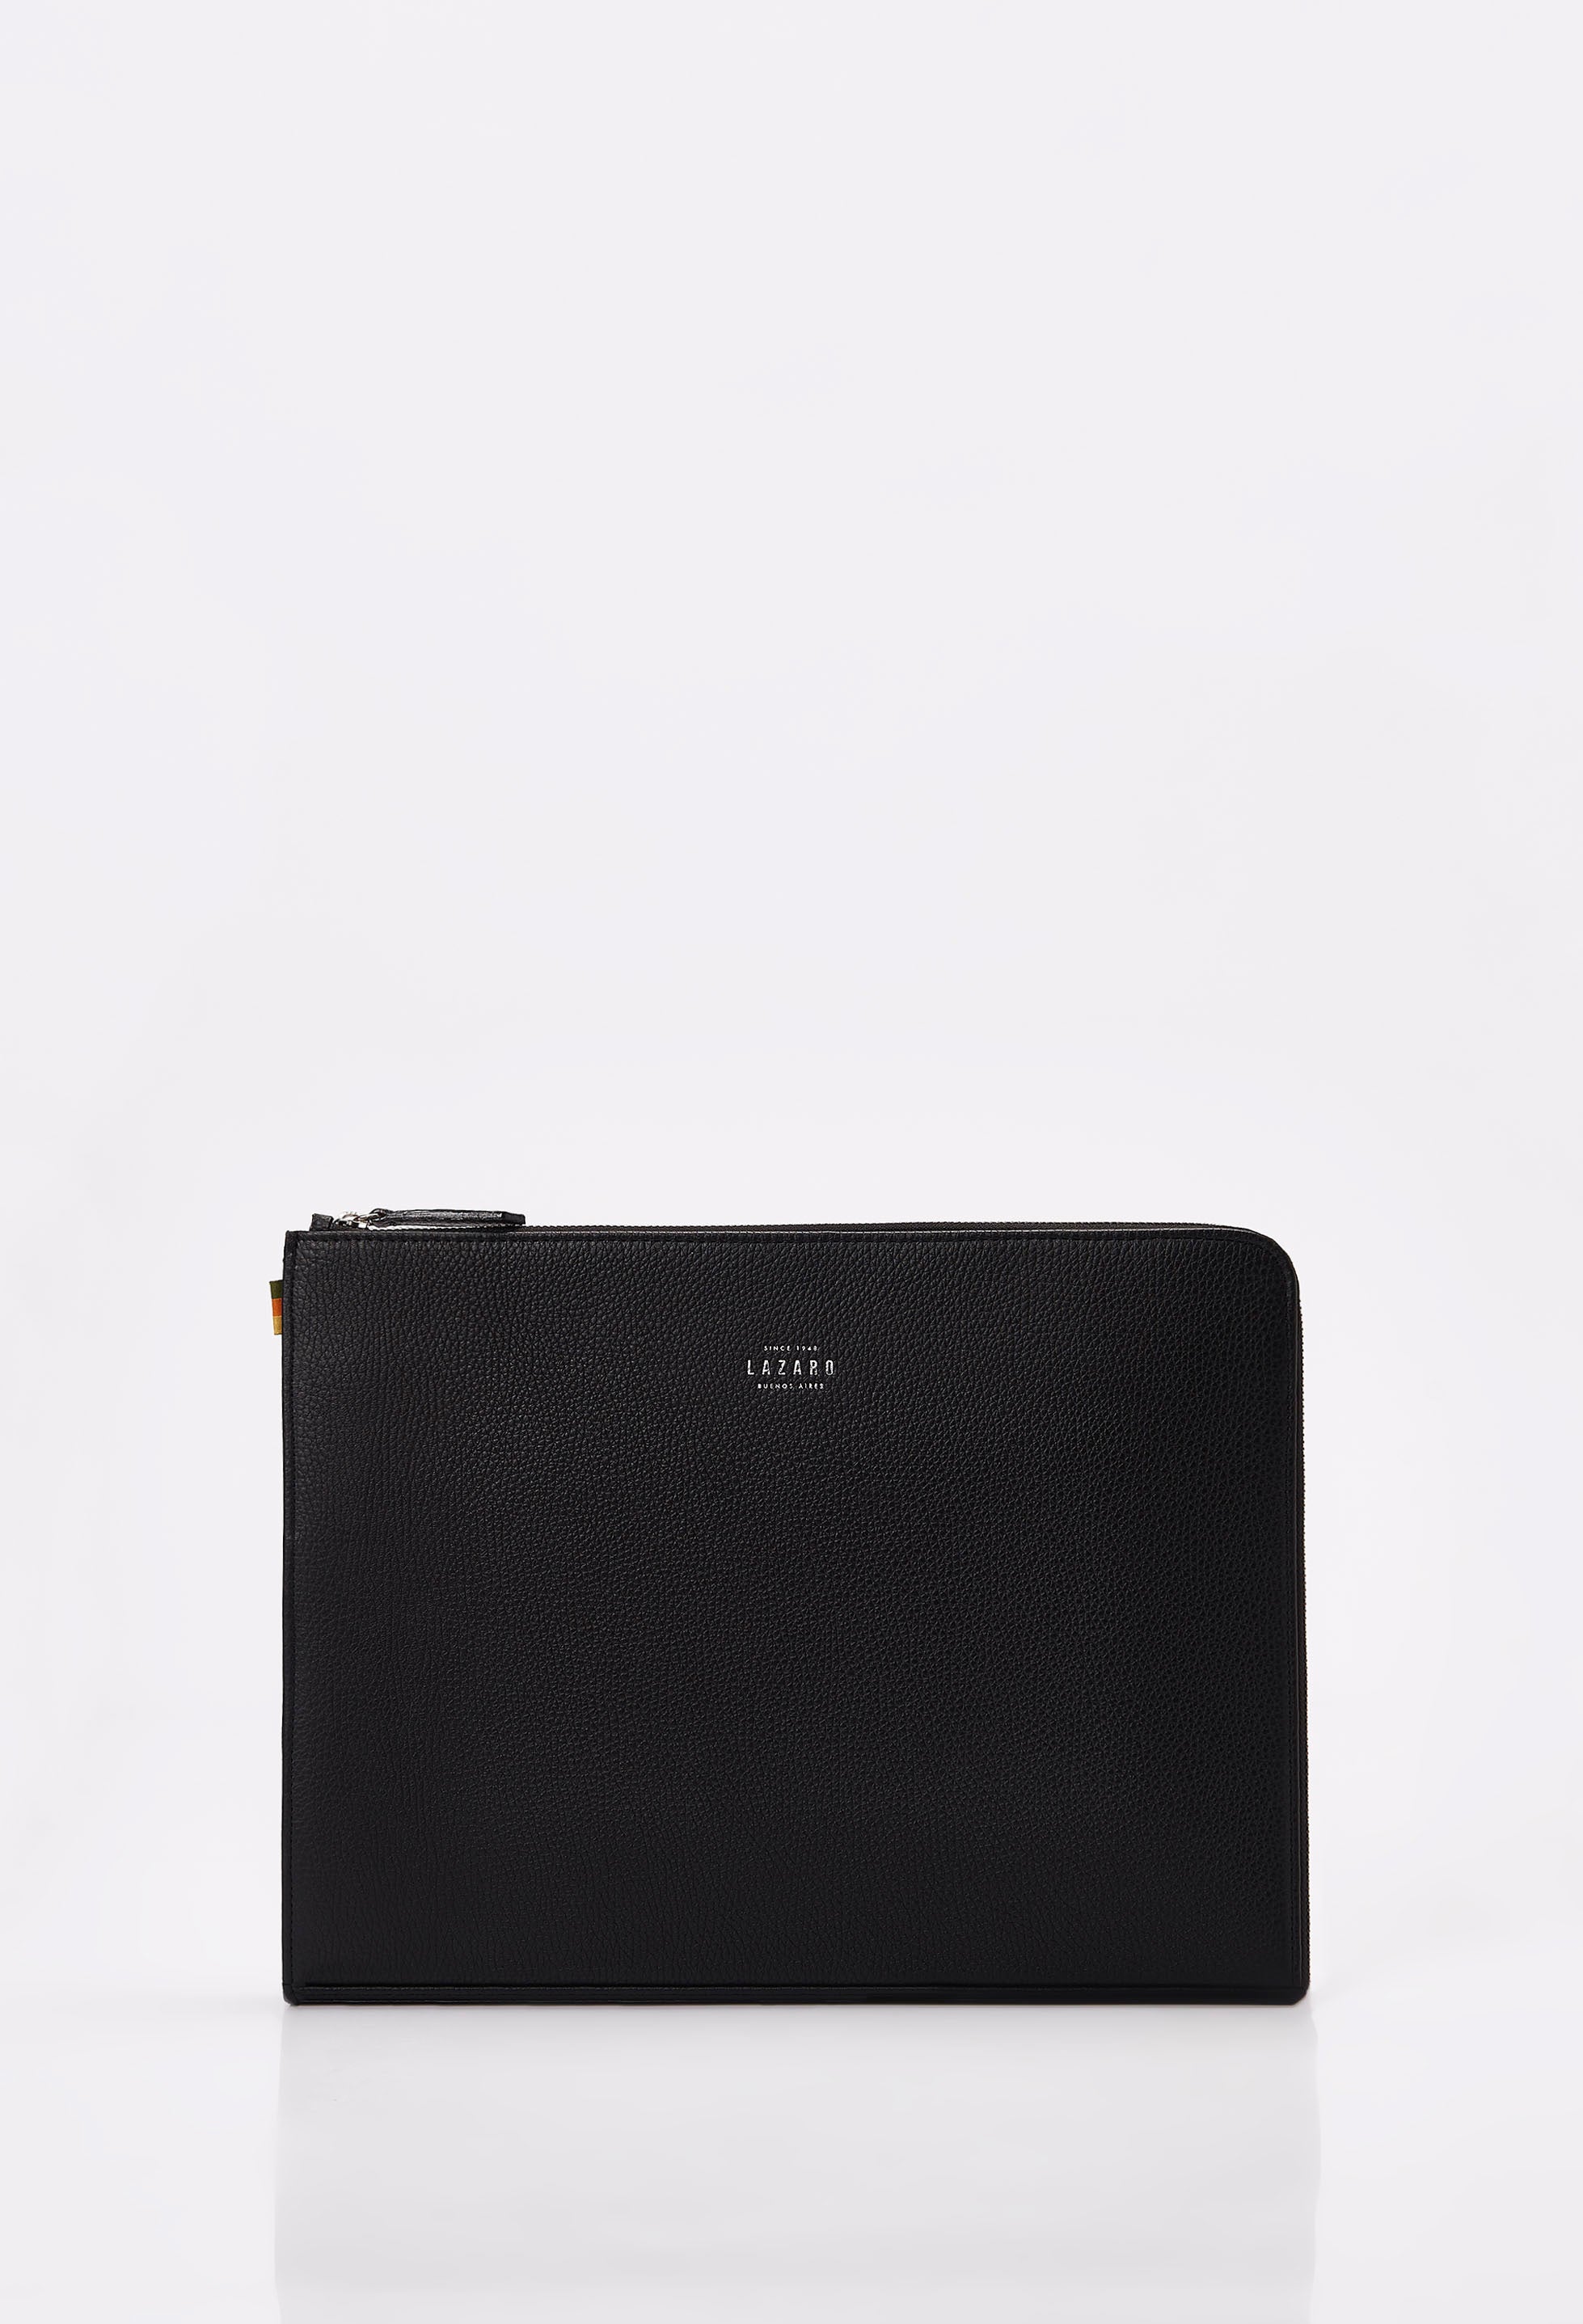 Front of a Black Leather Slim Computer Case with Lazaro logo.